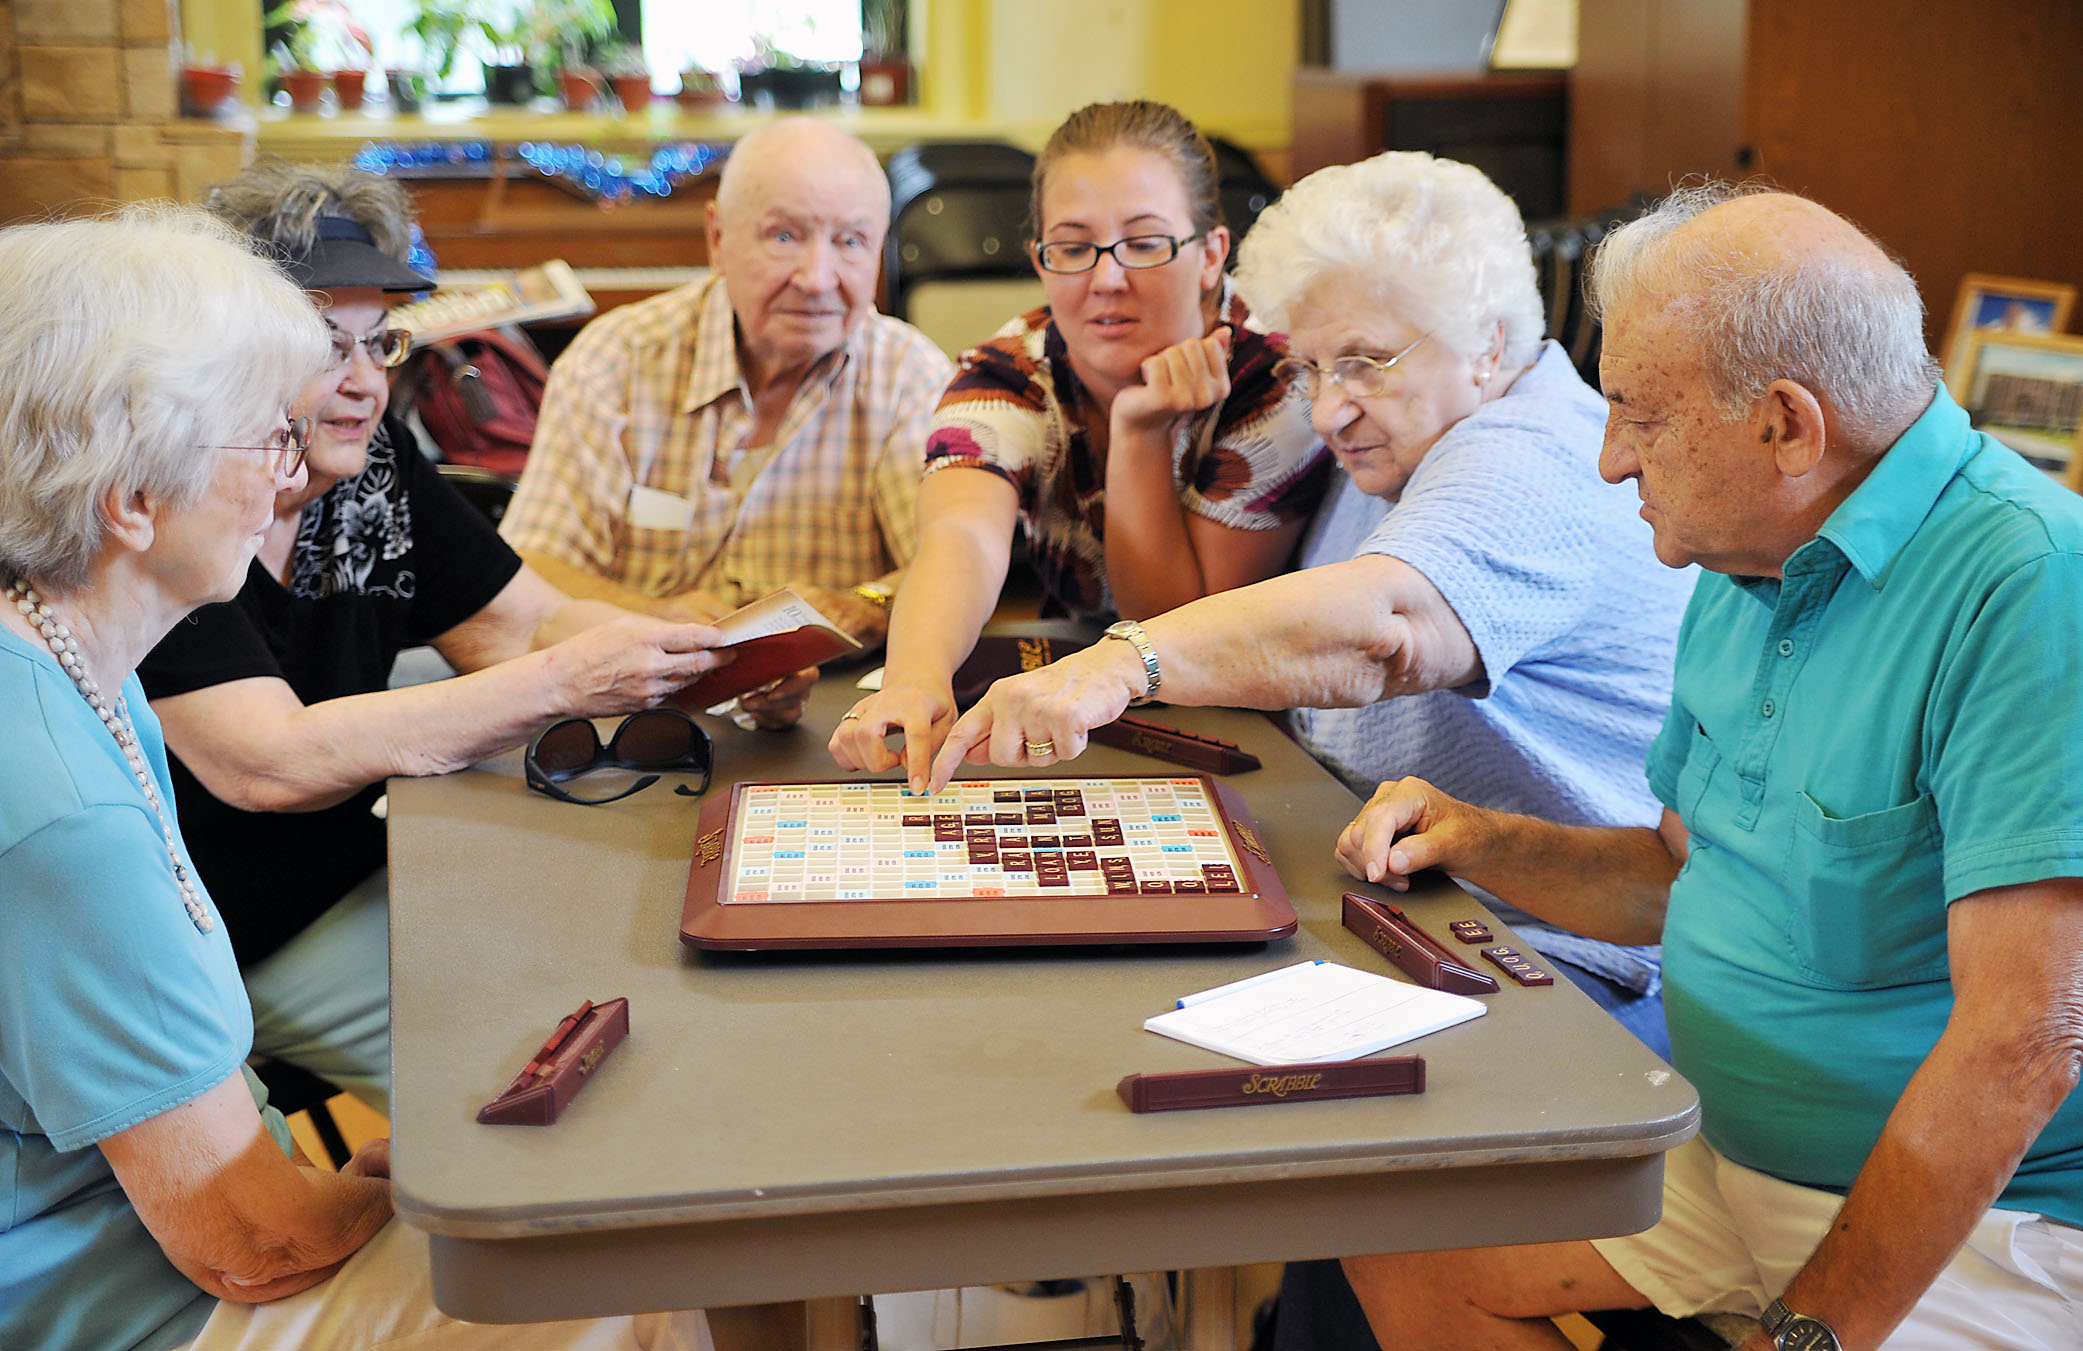 Indoor-Group-Activities-for-Seniors-Promote-Socialization.-Seniors-playing-scrabble